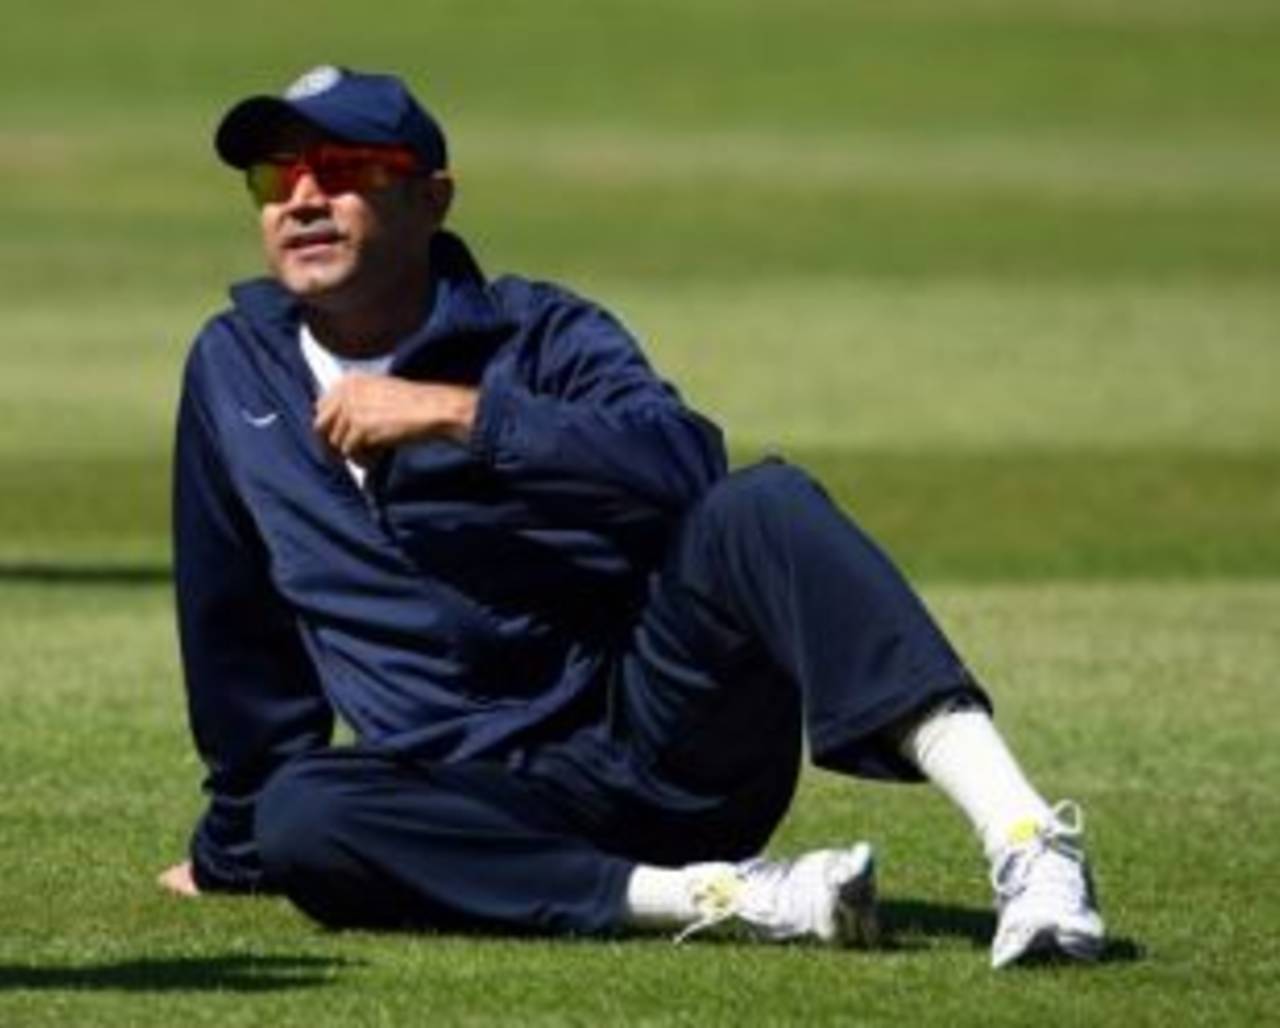 Virender Sehwag: "Delhi has so much talent but talented players are not playing in Under-19 level"&nbsp;&nbsp;&bull;&nbsp;&nbsp;Getty Images